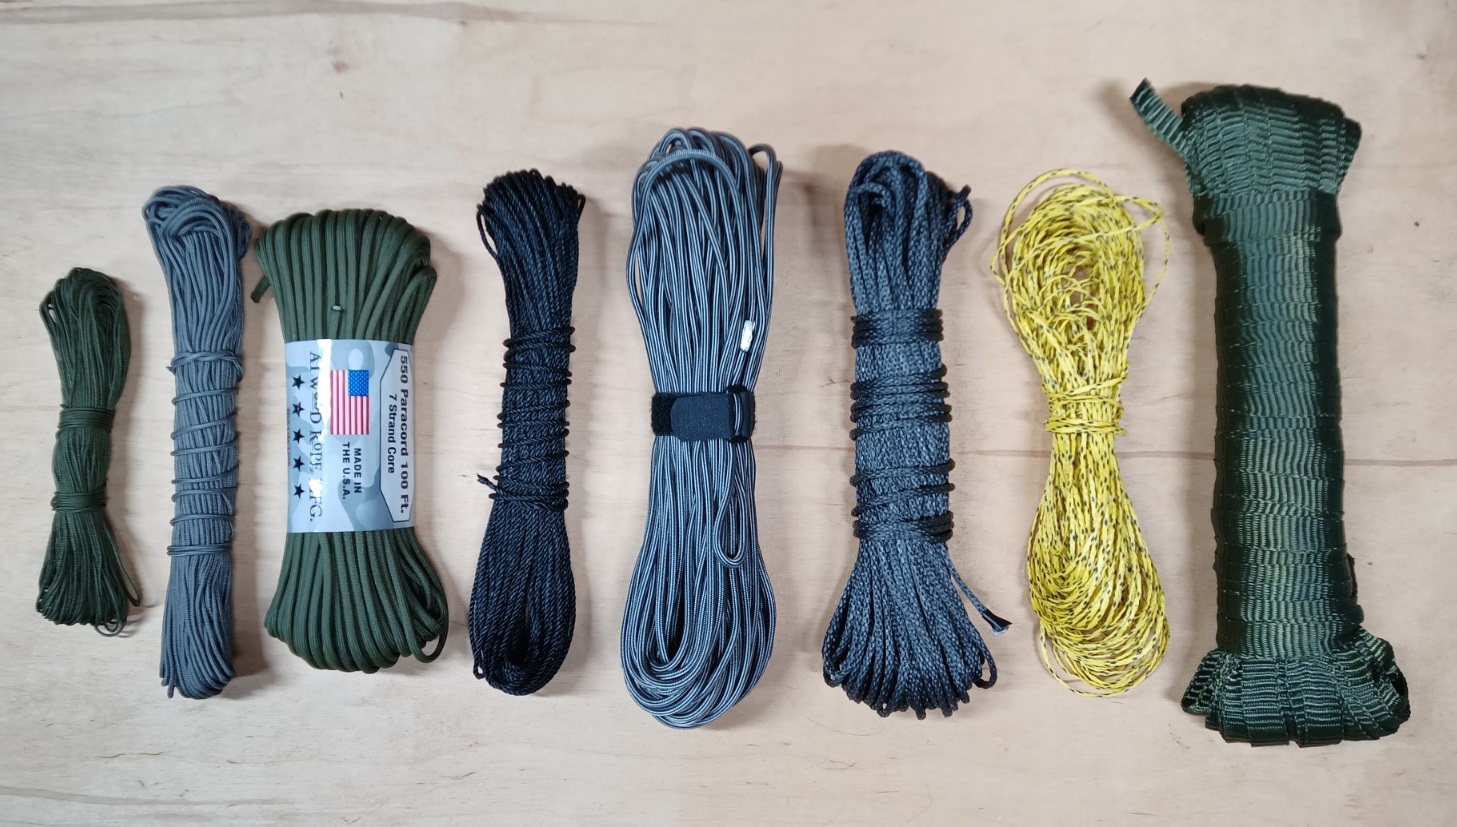 Cordage Bank line or 550 by Joe Tactical 